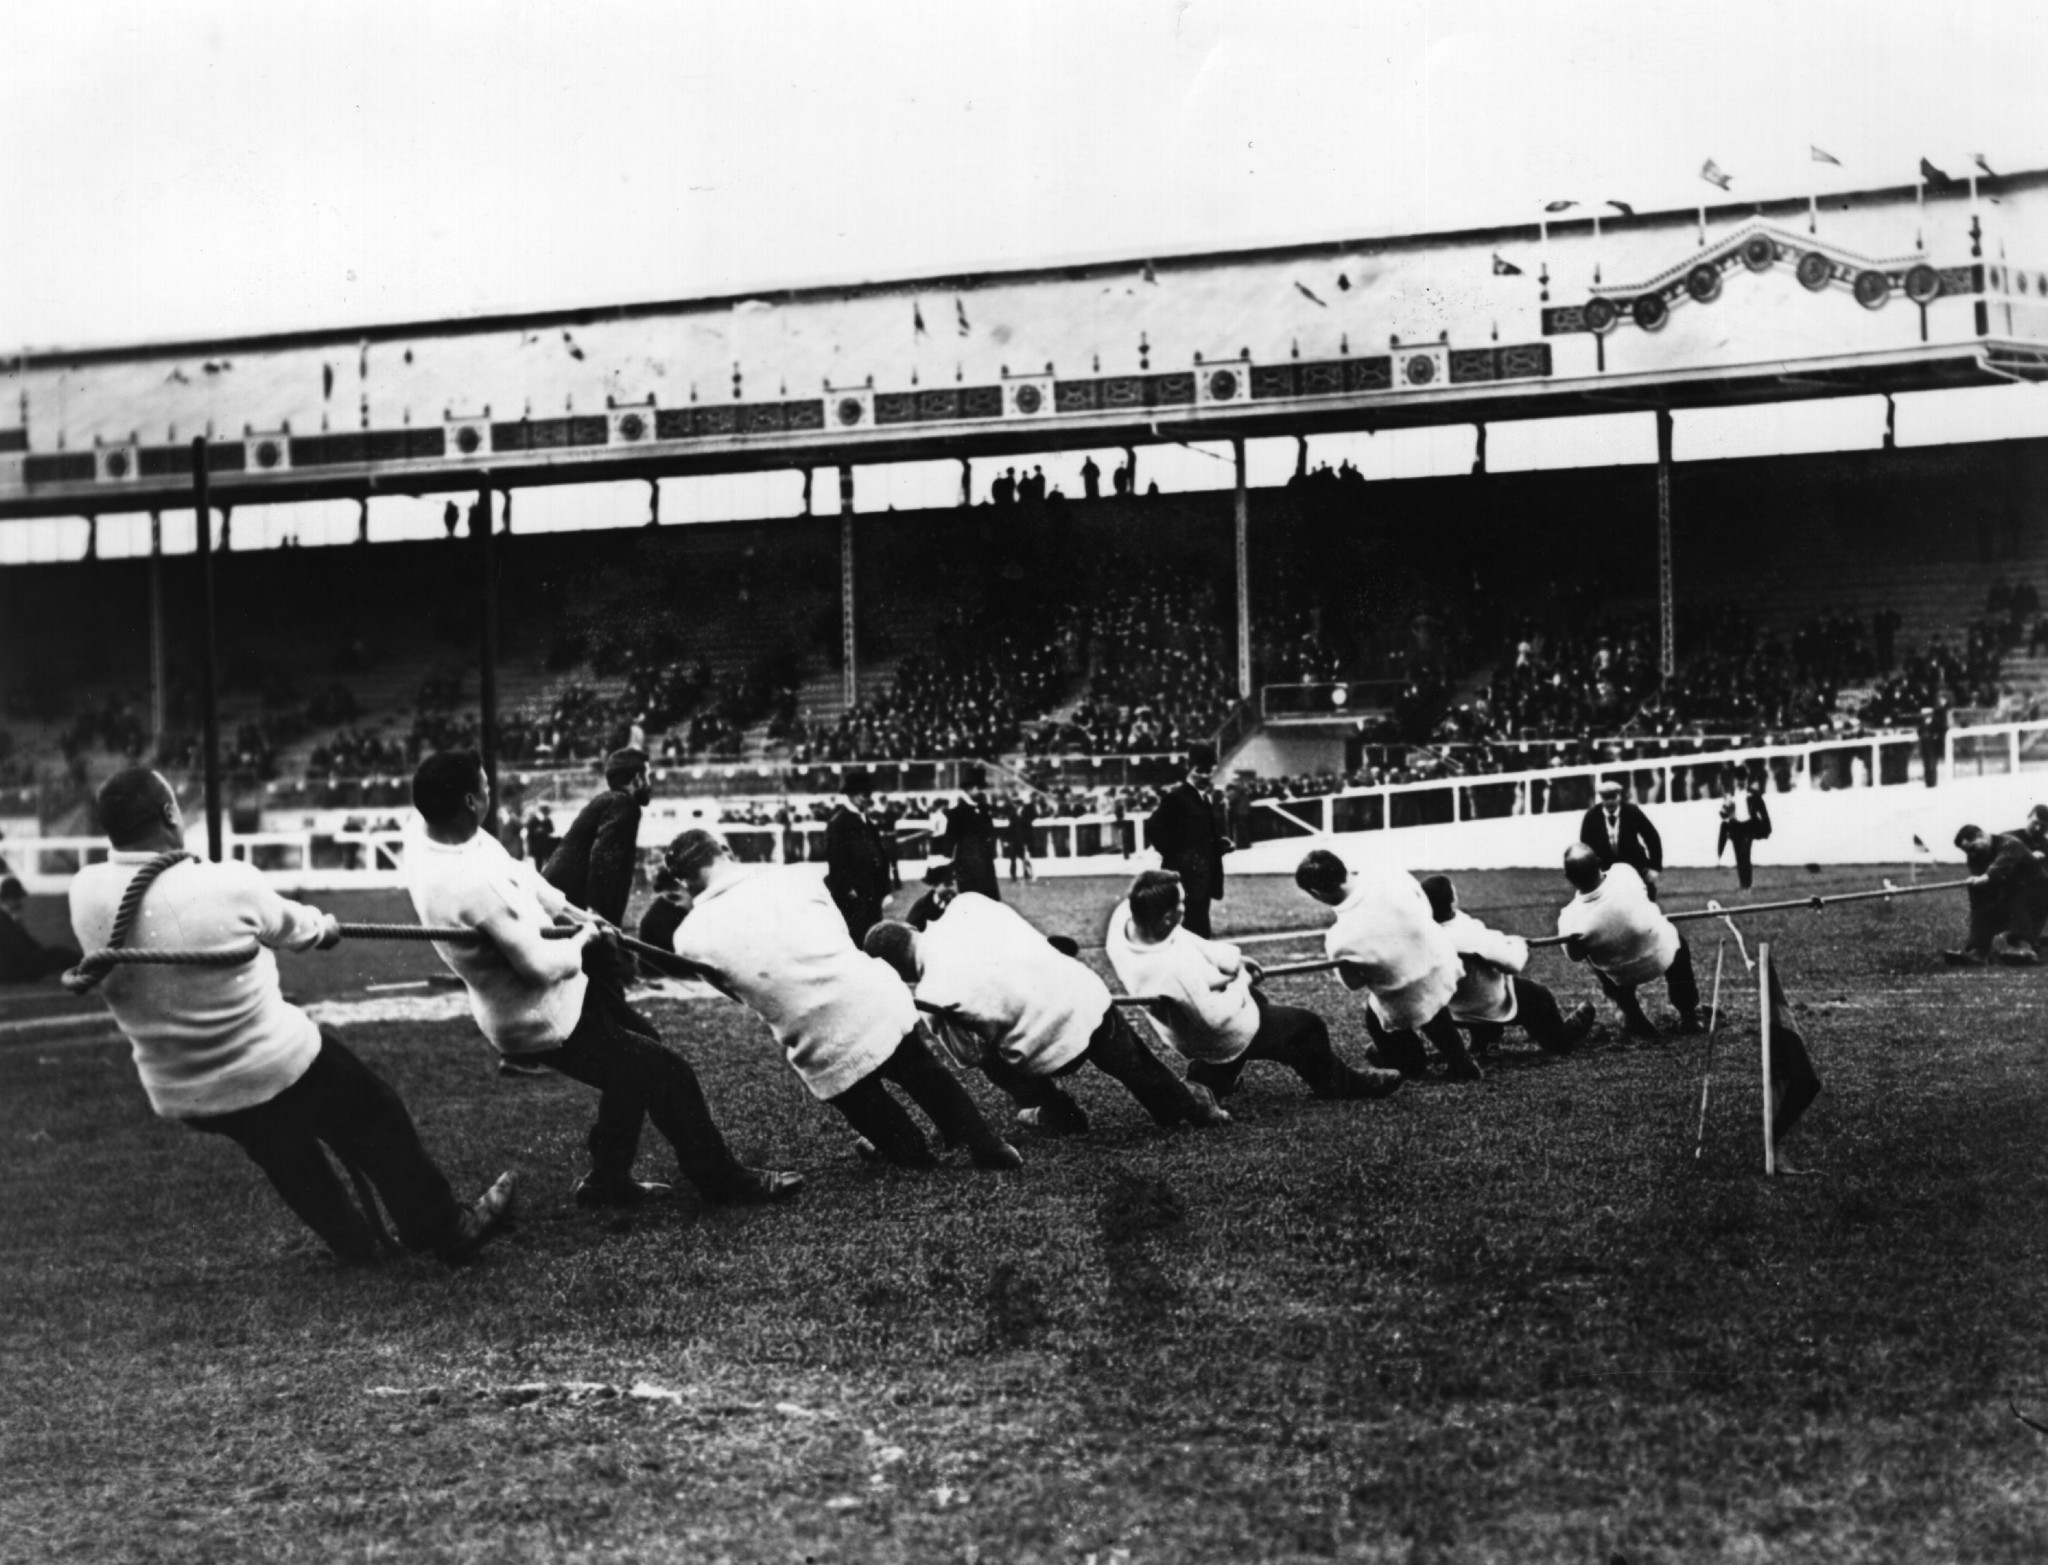 Tug-of-war was one of the events that has been dropped from the Olympic programme of the Summer Games ©Getty Images